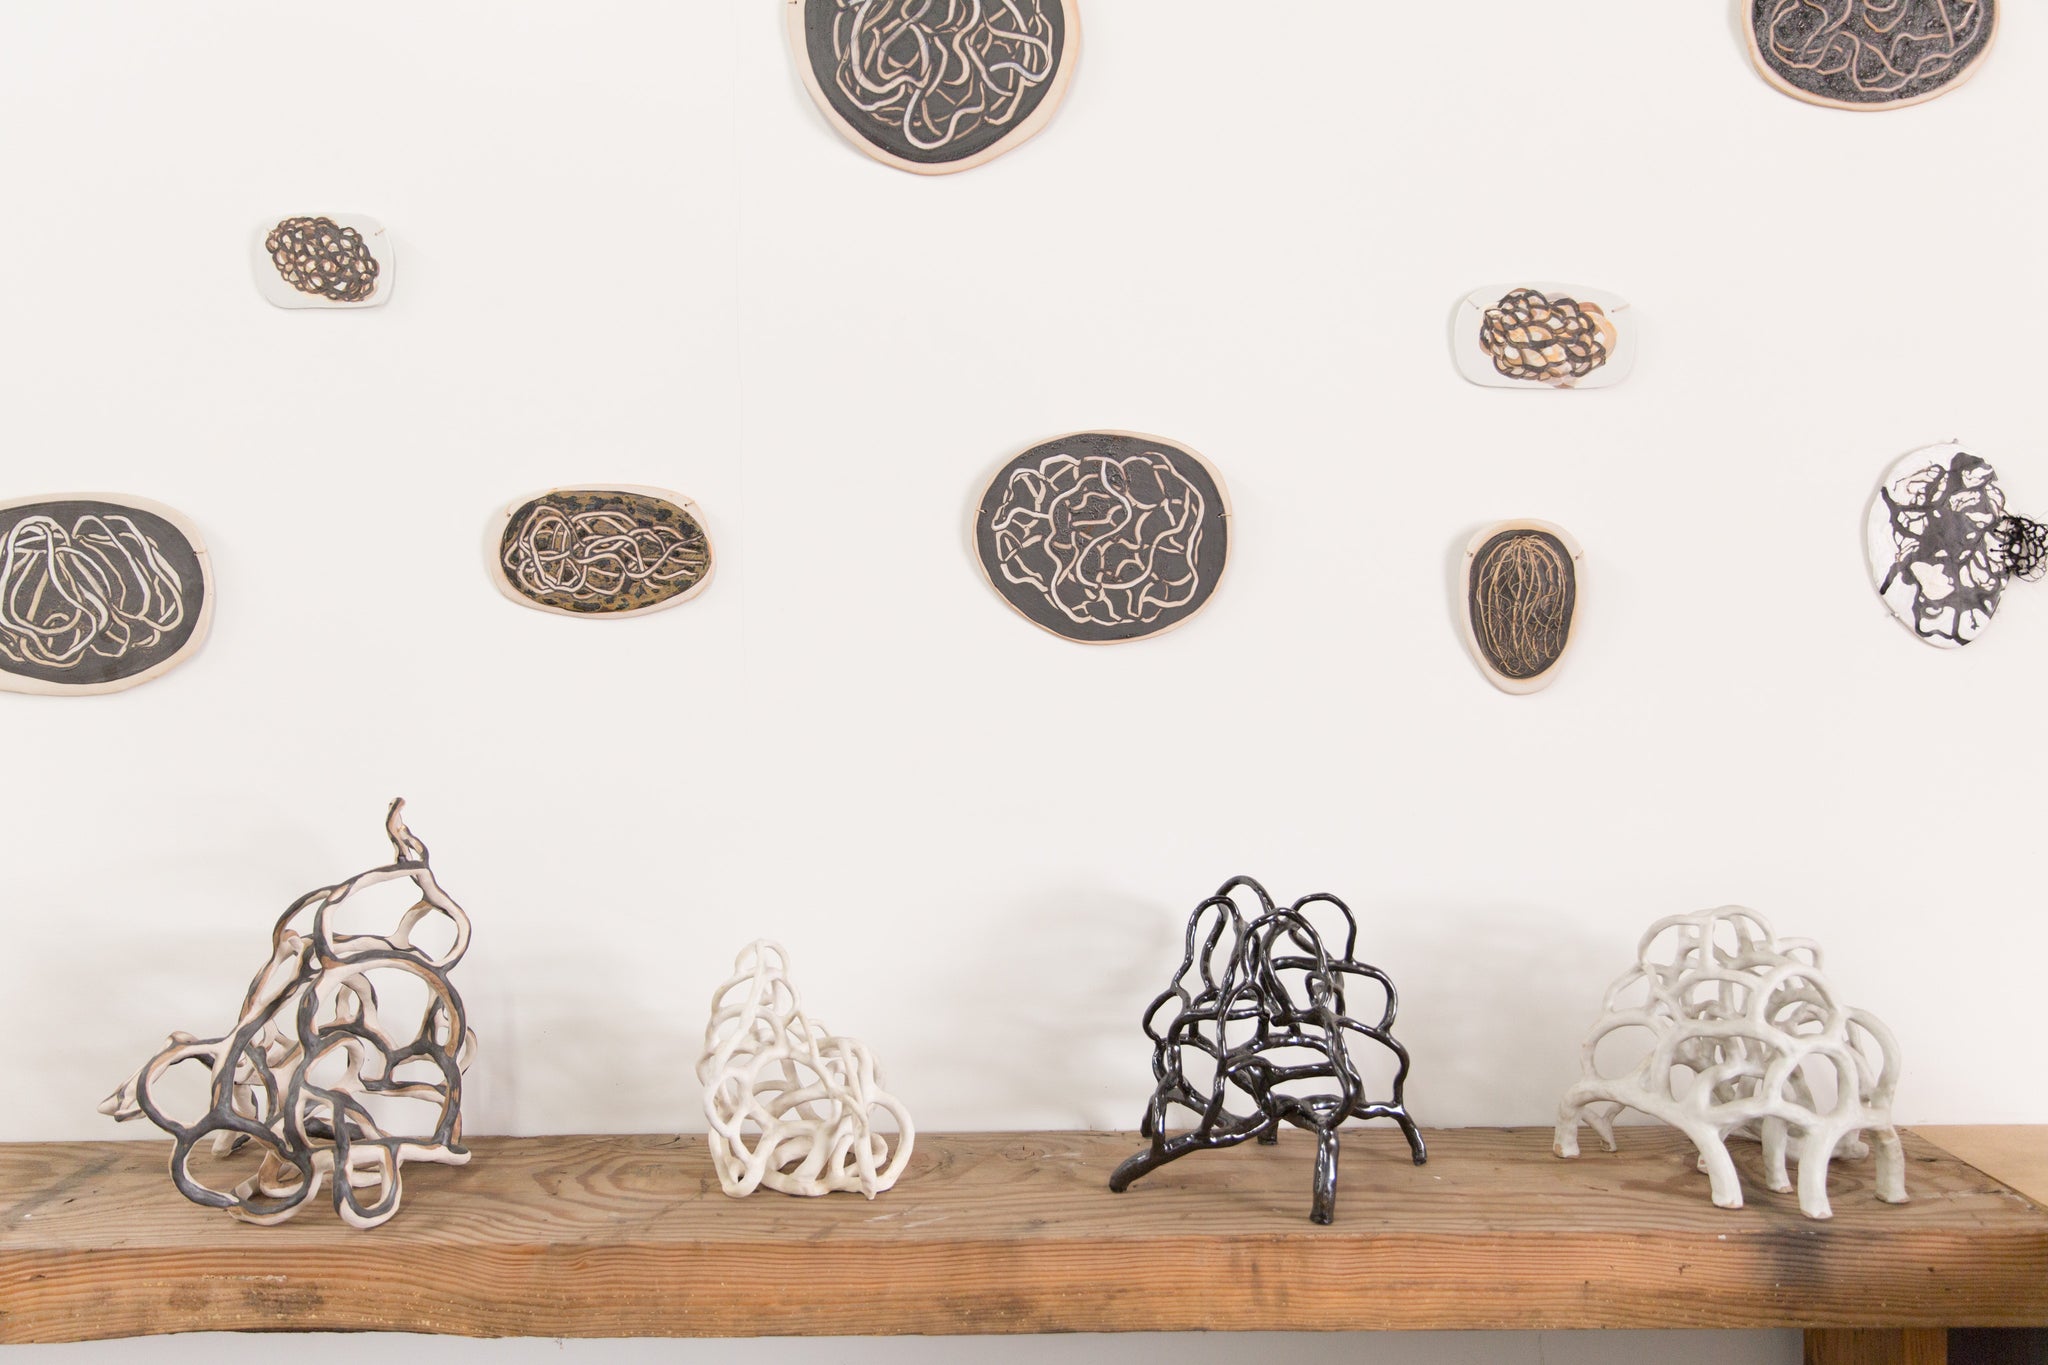 ceramic artworks by Laura Cooper hung on wall and on standing on table